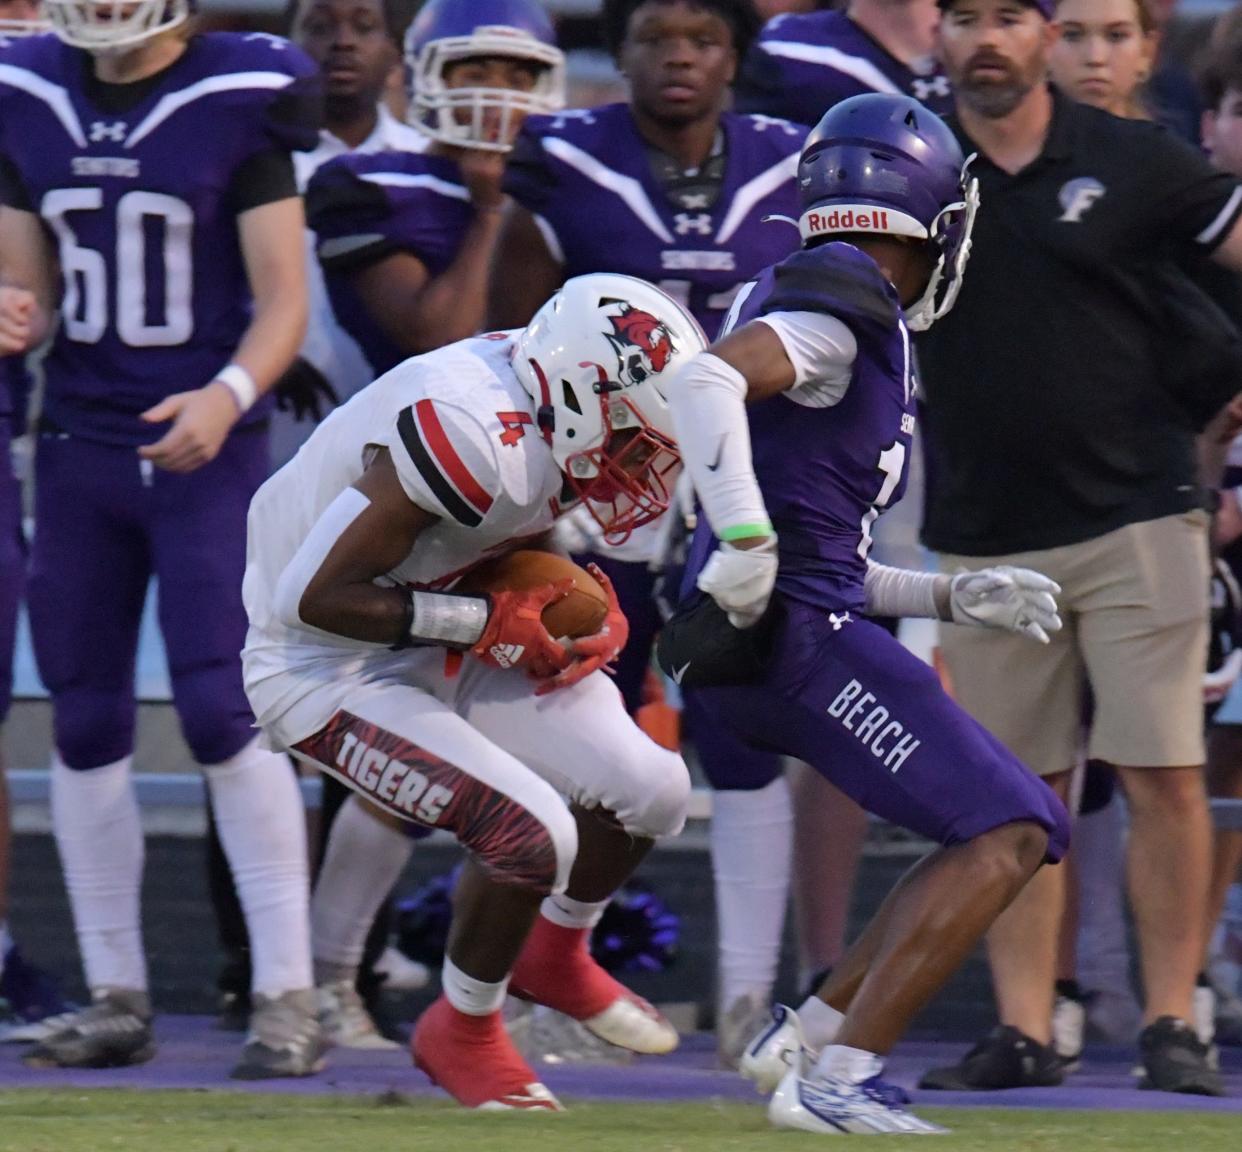 Jackson's Antwan Hart grabs the ball during a September game against Fletcher. Jackson is on the Class 2M playoff bubble, while Fletcher has a chance to clinch its playoff berth if they defeat First Coast on Thursday.